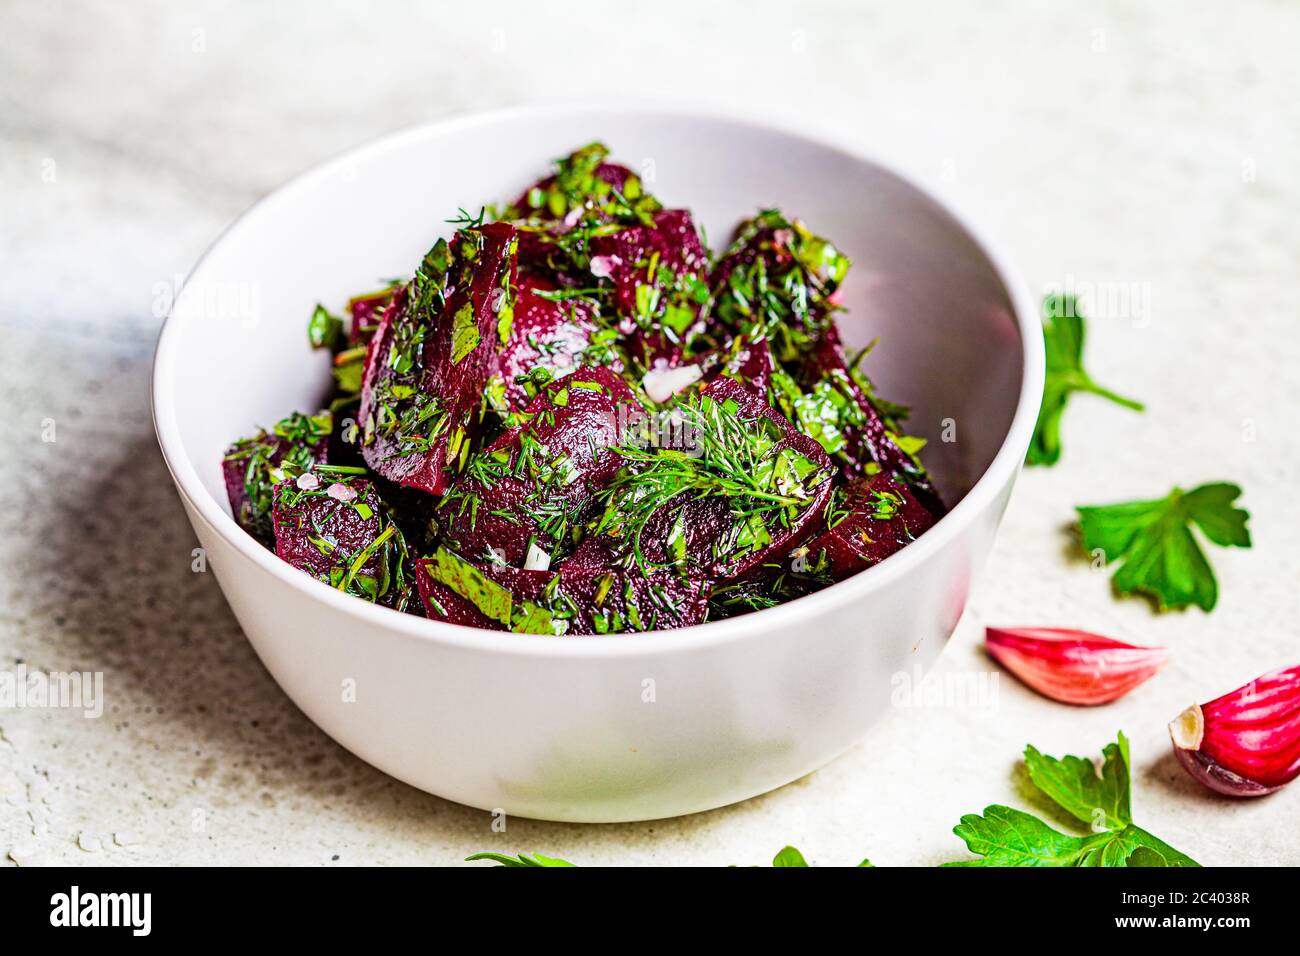 Beetroot salad with garlic and herbs in a gray bowl on a light background. Stock Photo